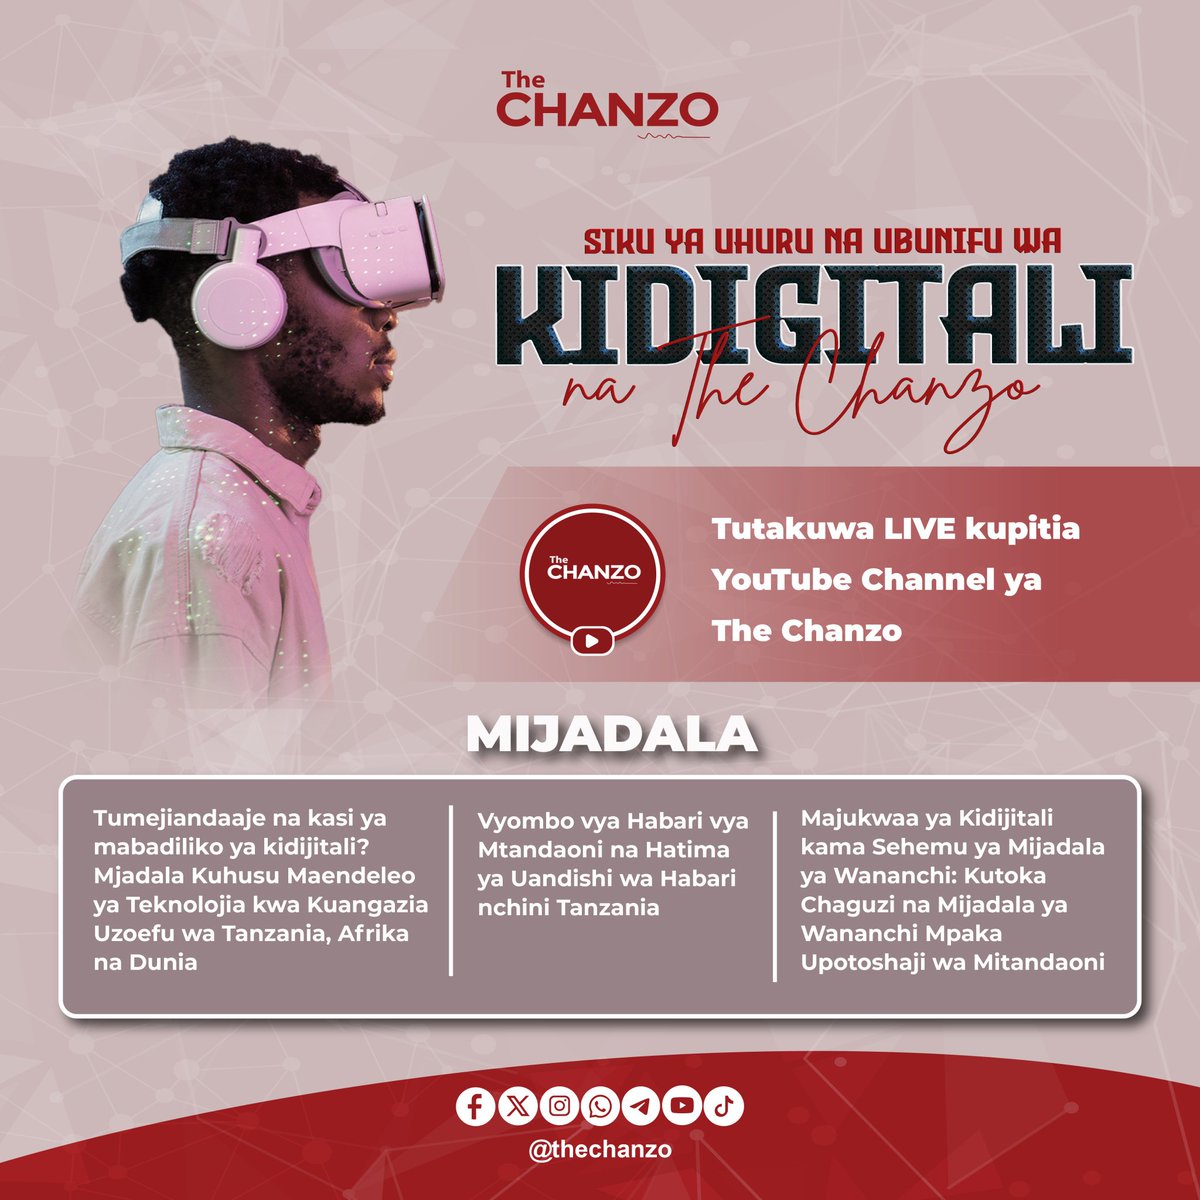 Tanzania's leading multimedia storytelling platform providing breaking news, analysis, reports etc, @TheChanzo is hosting Digital Freedom & Innovation Day, bringing together innovators and thought leaders on April 20. These are the topics that will be discussed. #UhuruNaUbunifu